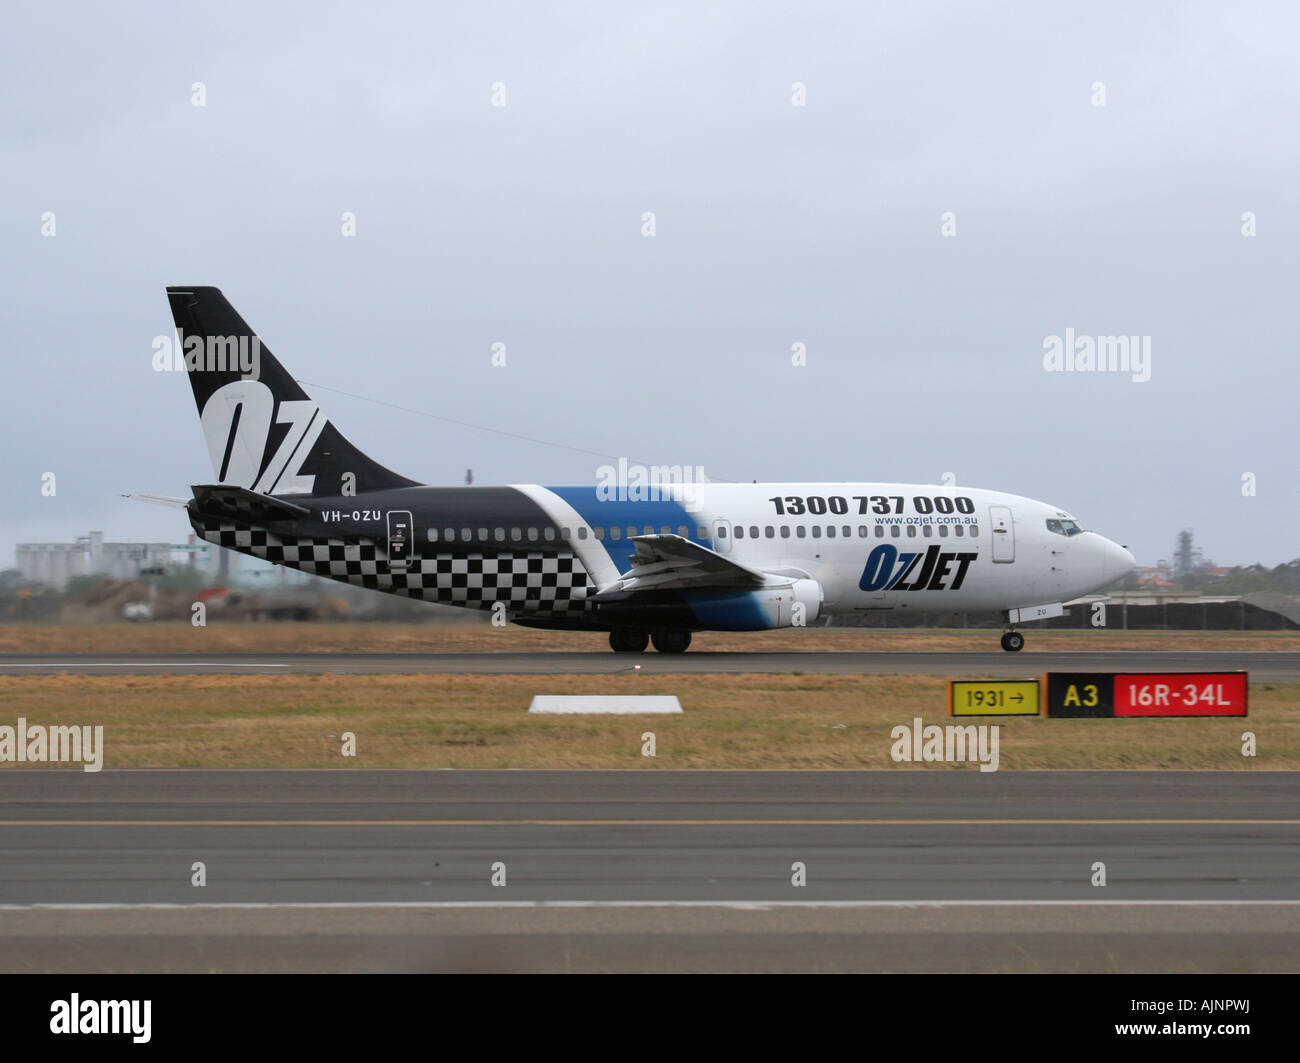 OzJet Airlines Boeing 737-200Adv departing from Sydney Stock Photo